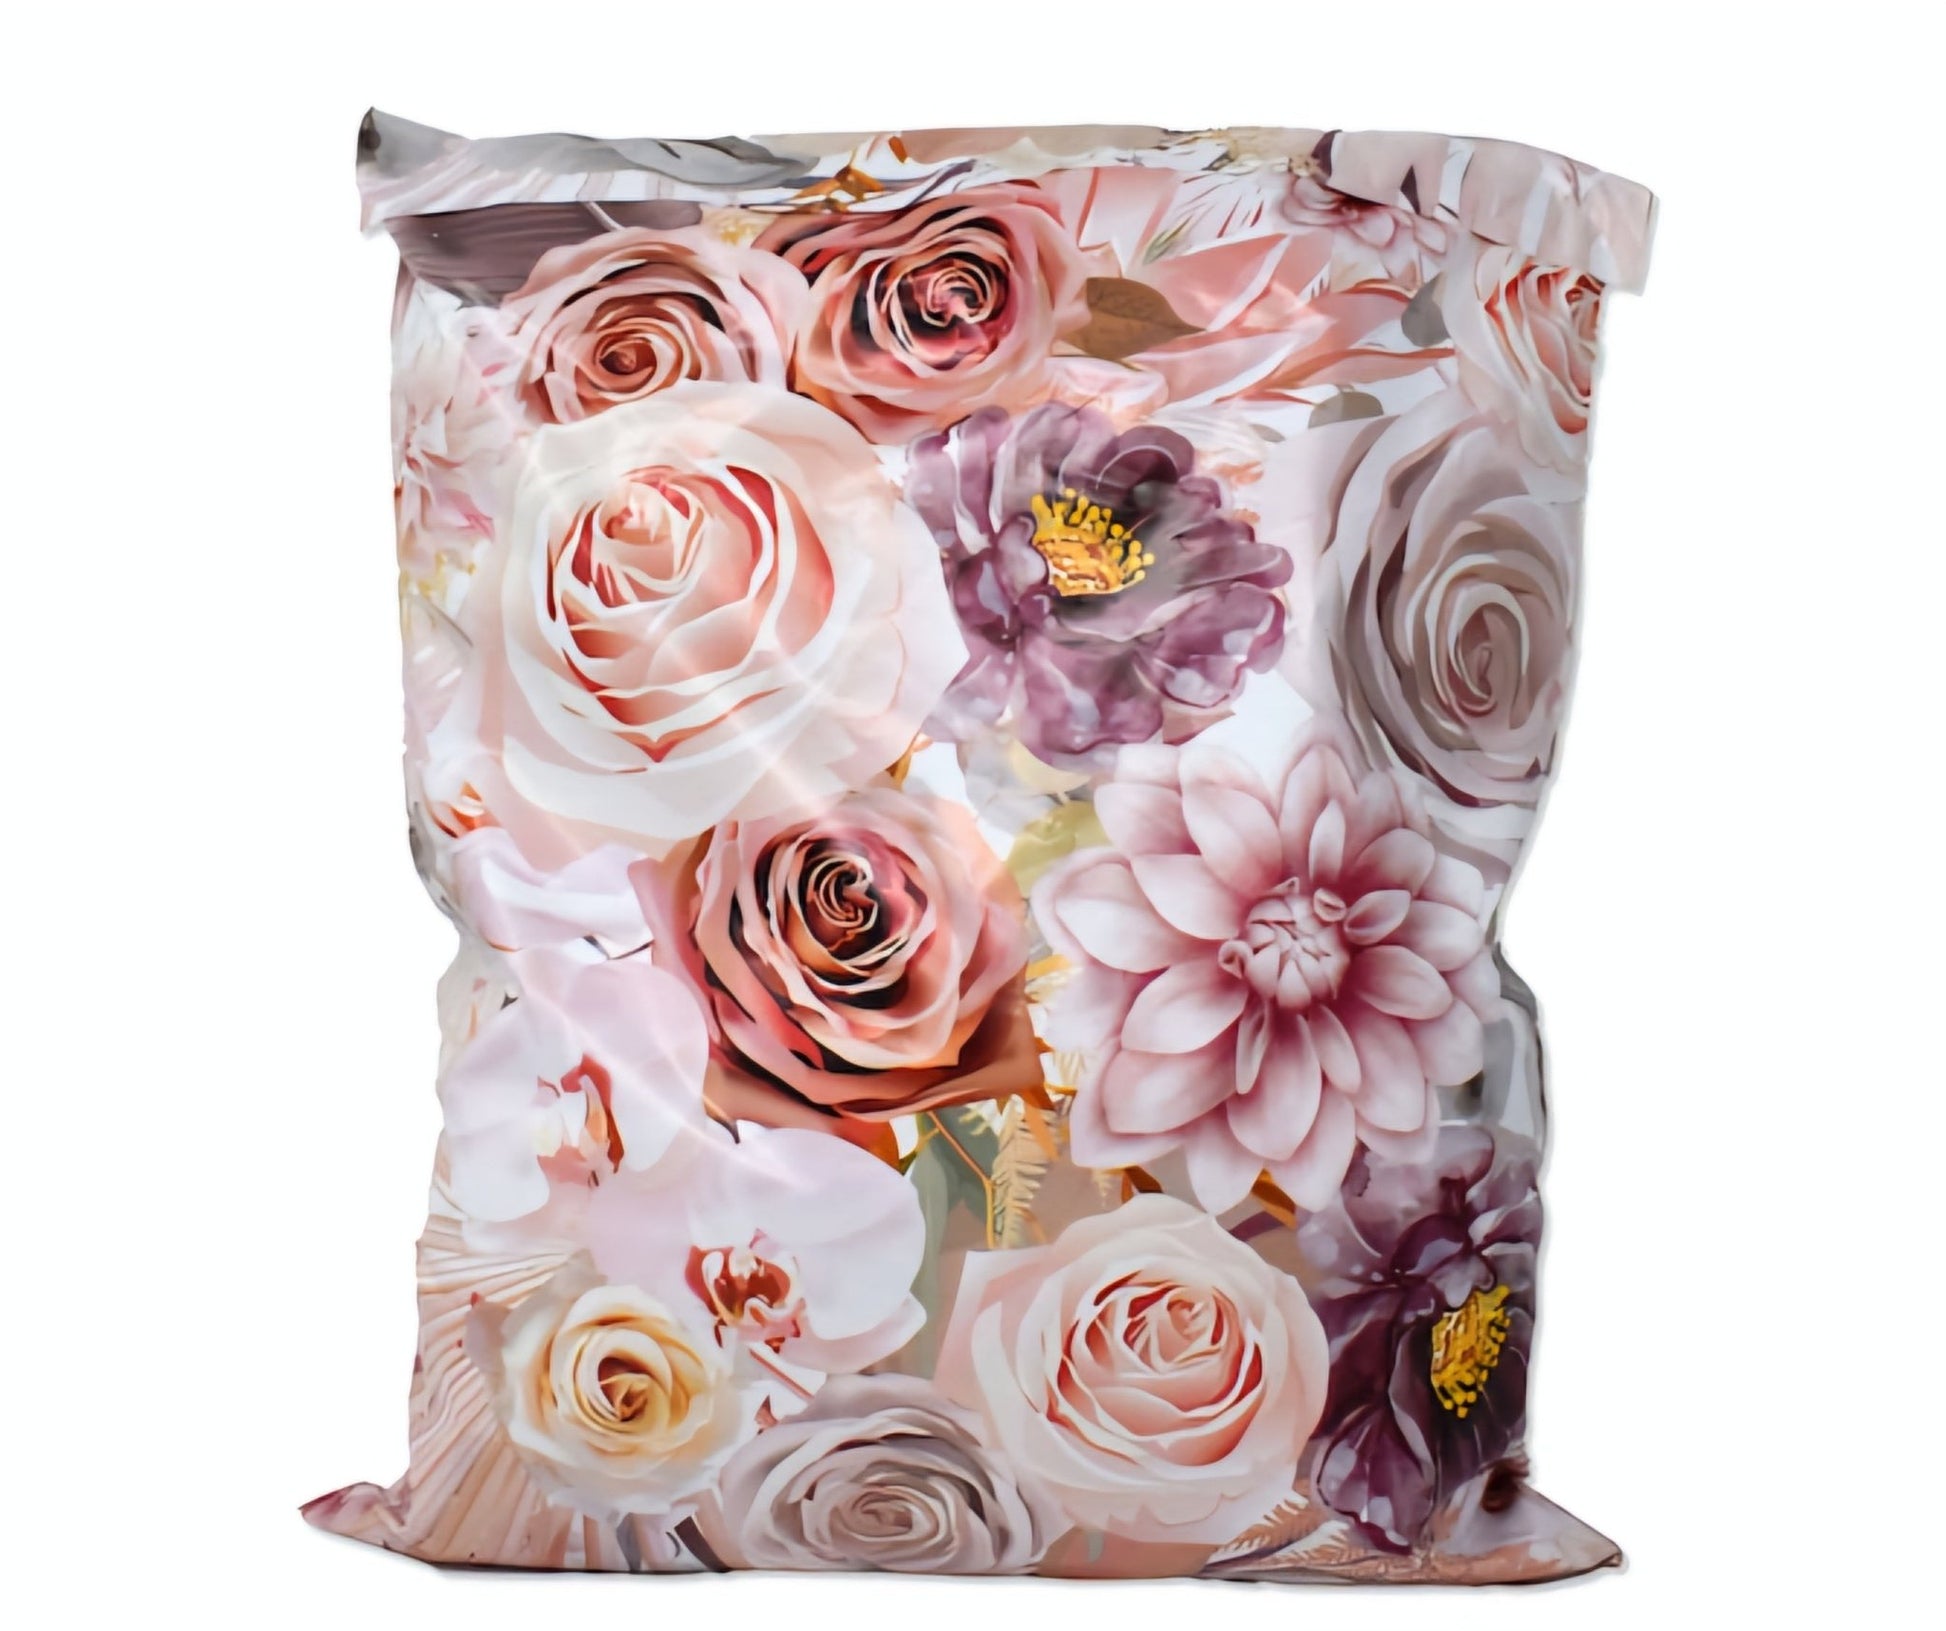 Boho Flowers & Roses Poly Mailers Size 14x17 Colorful Shipping Bags - Shipping In Style